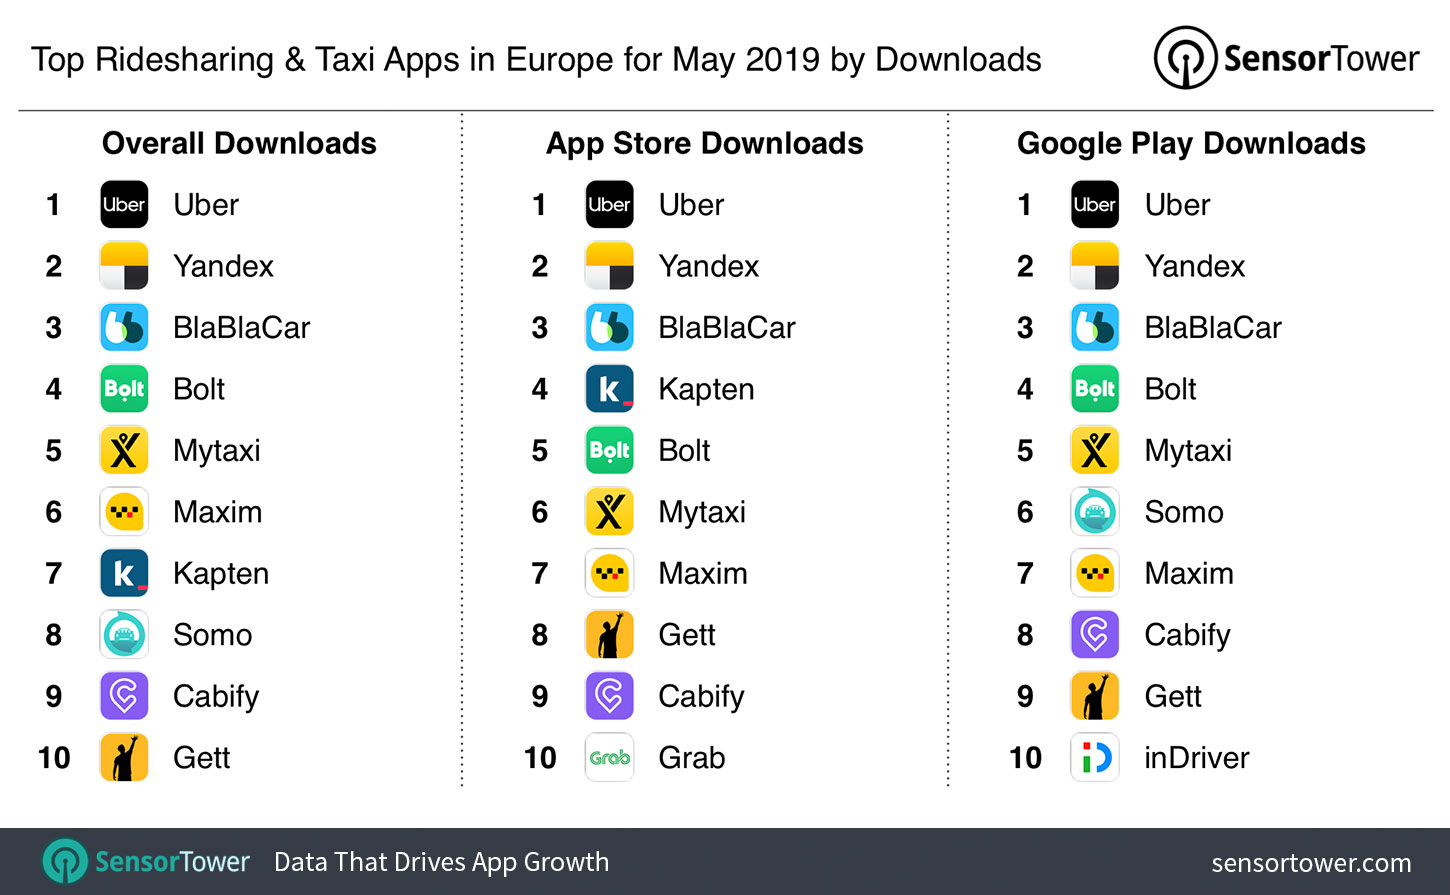 Top Ridesharing and Taxi Apps in Europe for May 2019 by Downloads